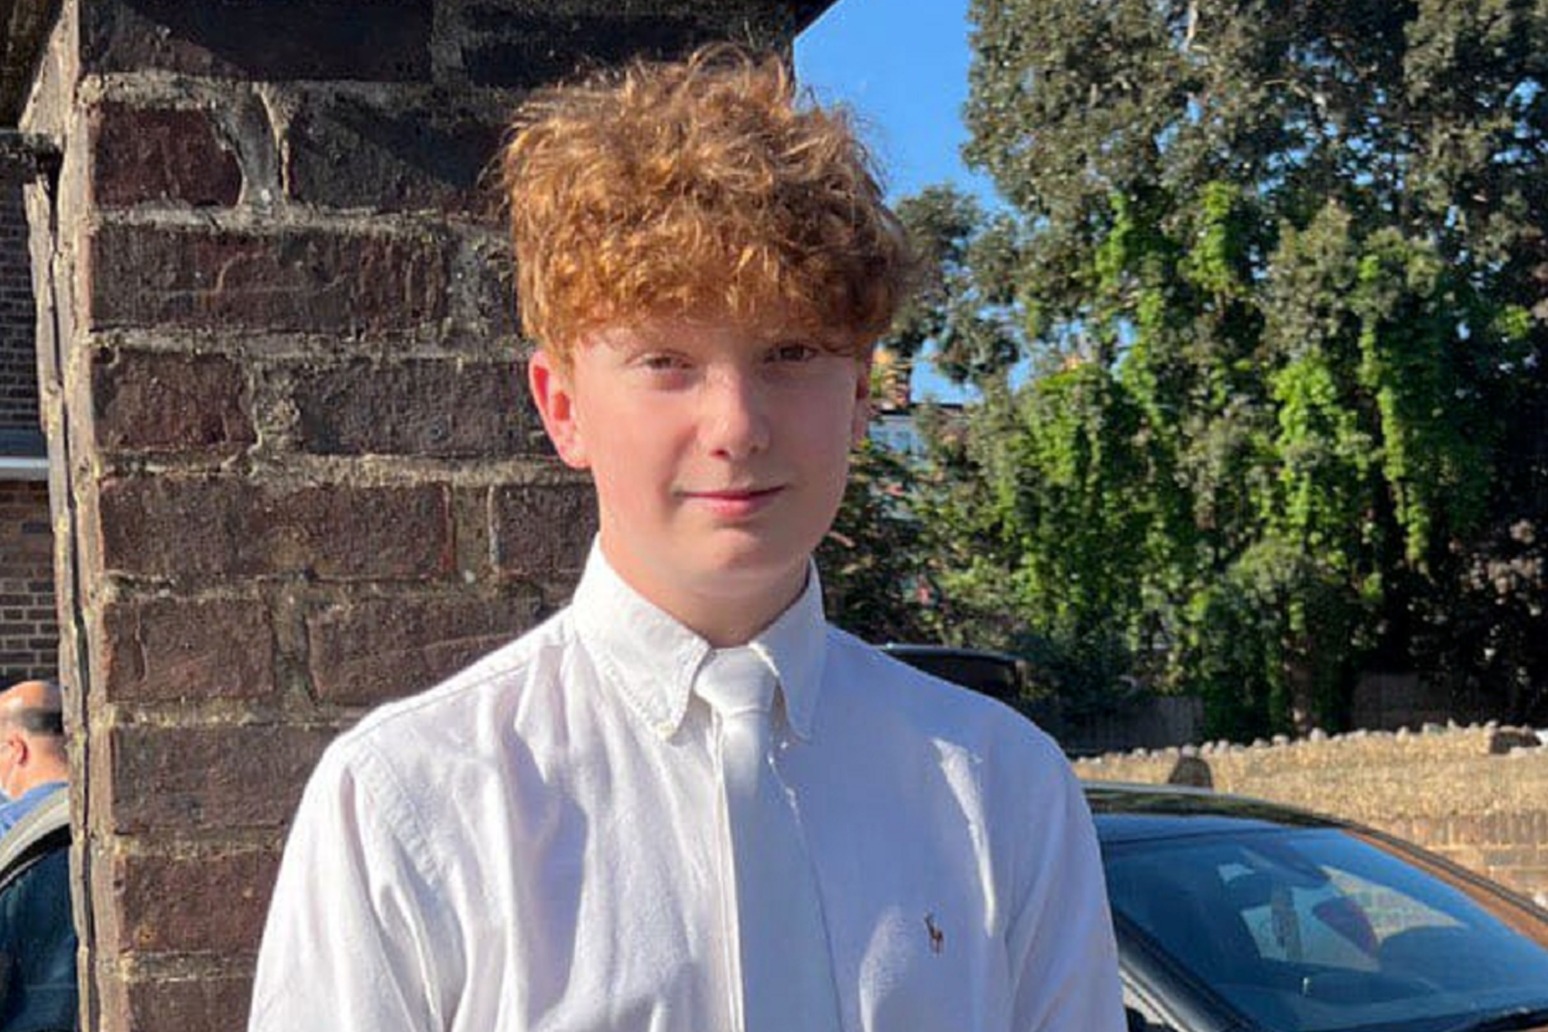 Teenage boy killed in Primrose Hill stabbing on New Year’s Eve named 